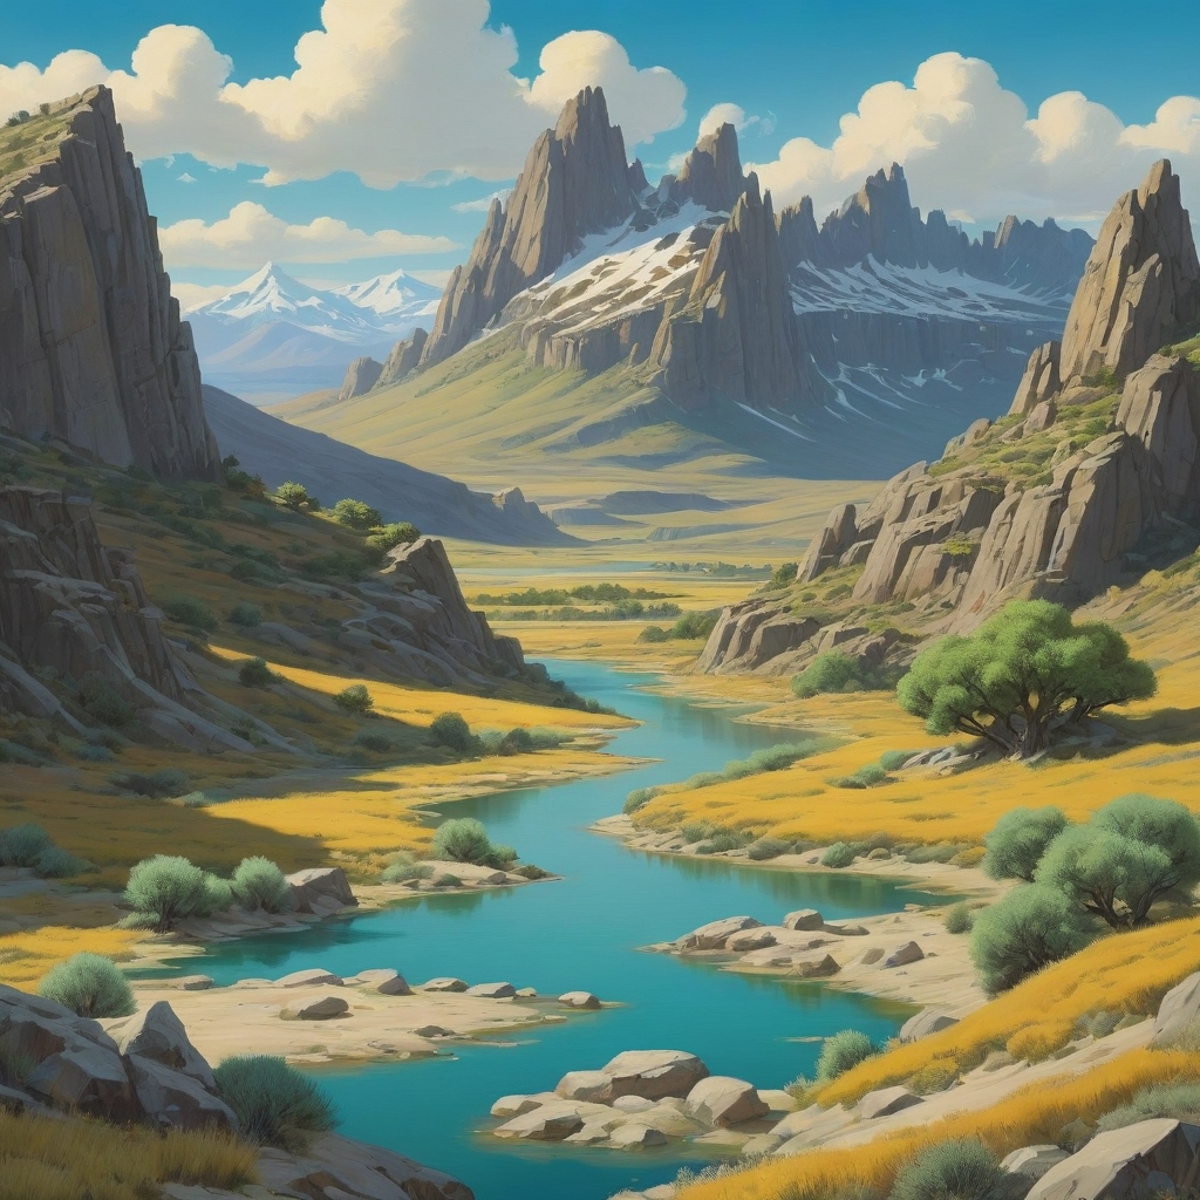 A Painting of a River Flowing Through a Mountainous Landscape